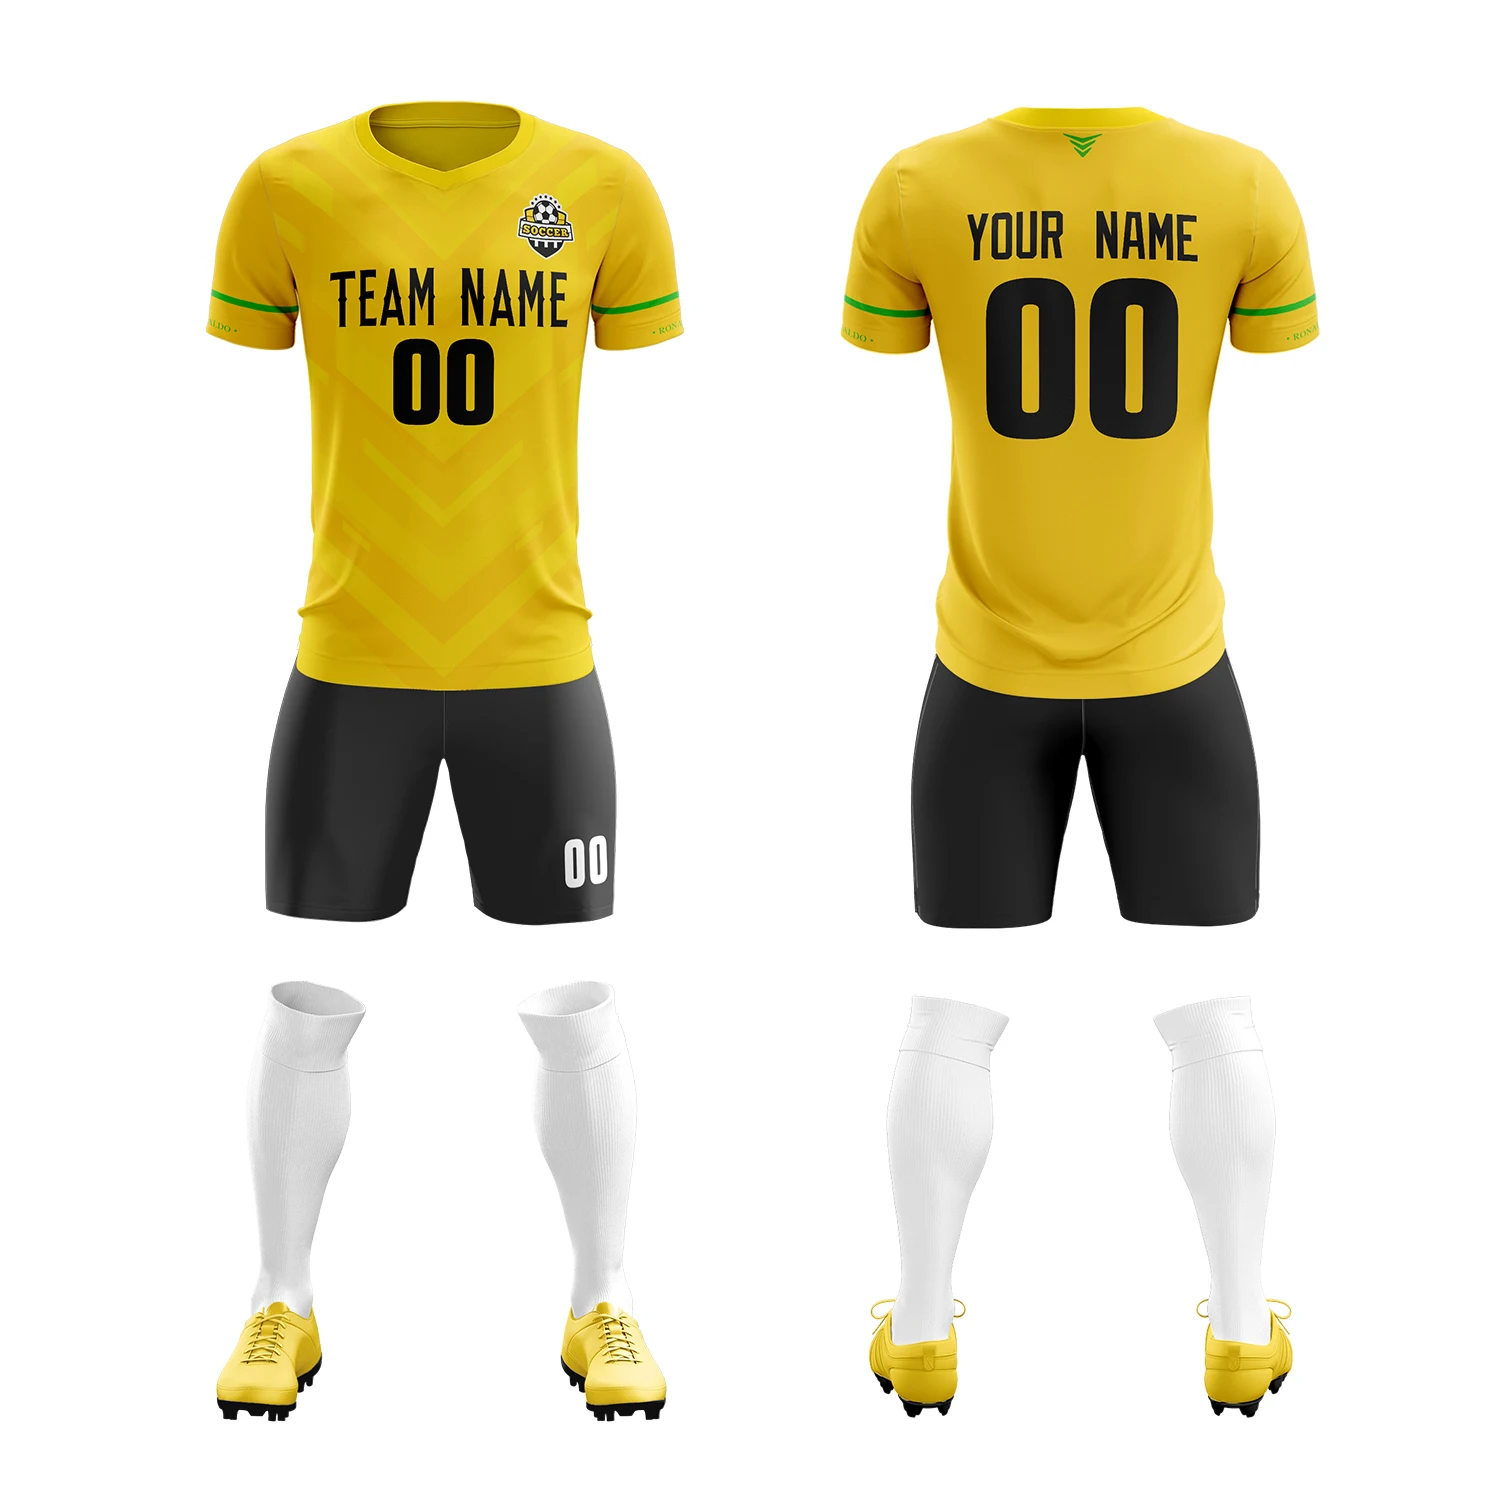  Custom Football Jerseys for Men Women Youth Design Your Own  Team,Name and Numbers : Clothing, Shoes & Jewelry